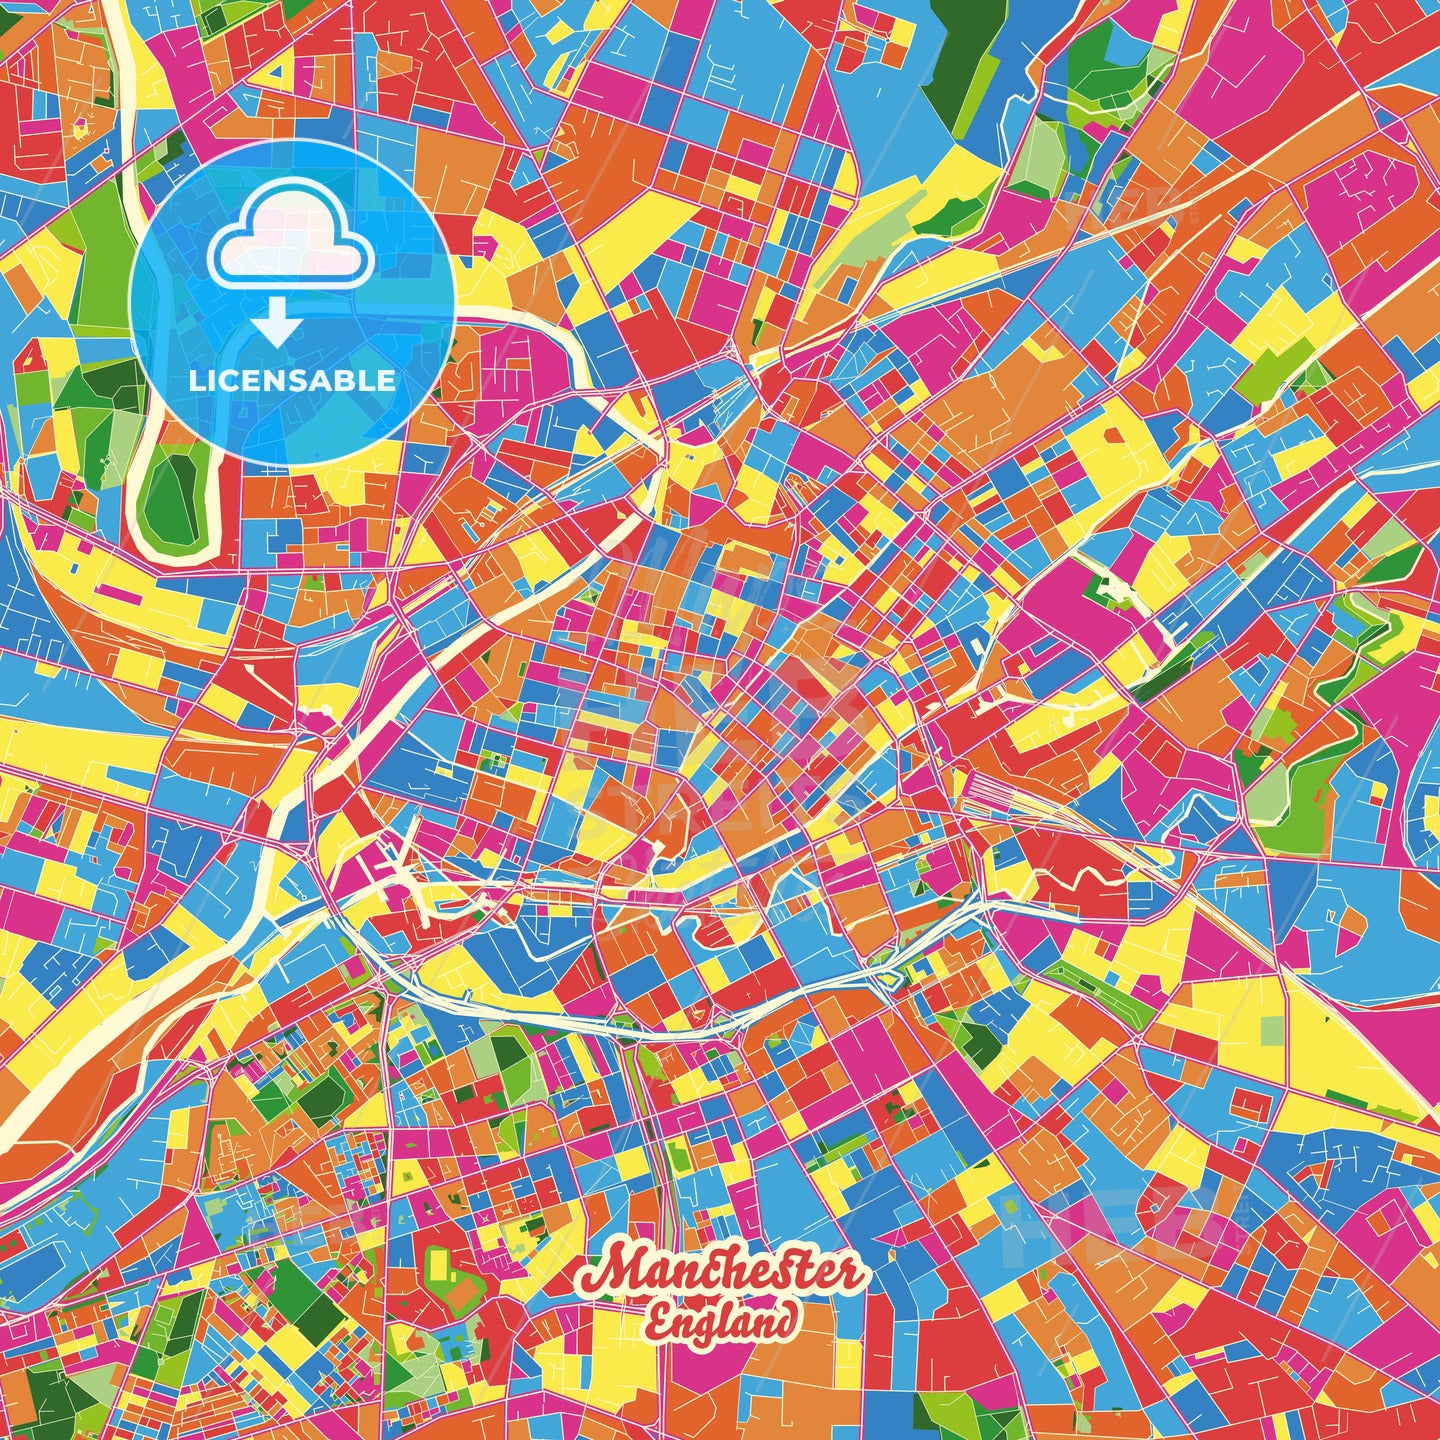 Manchester, England Crazy Colorful Street Map Poster Template - HEBSTREITS Sketches